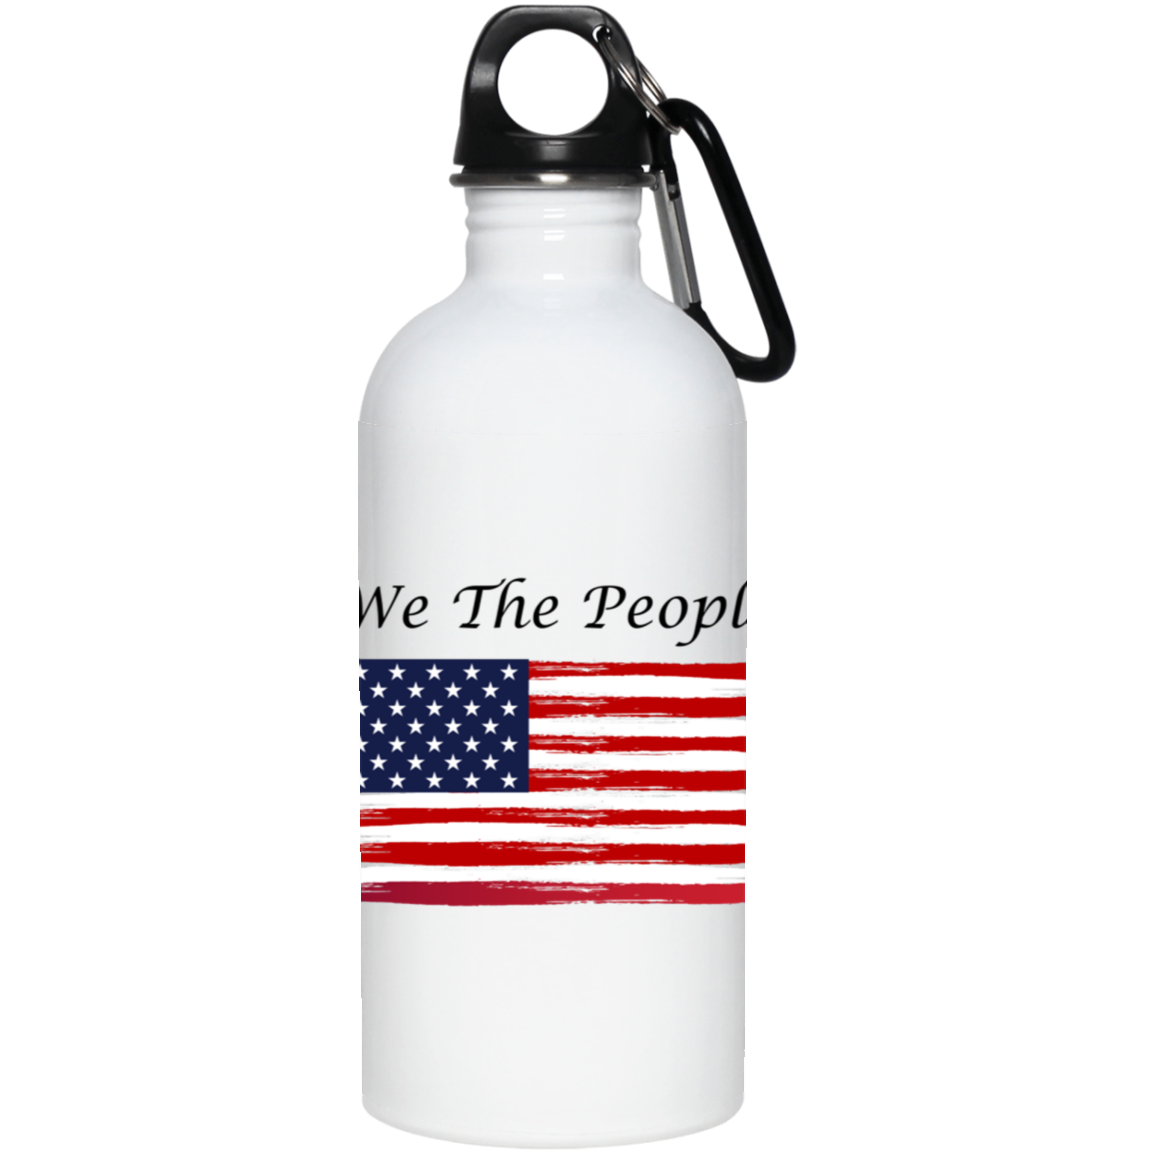 we the people 23663 20 oz. Stainless Steel Water Bottle